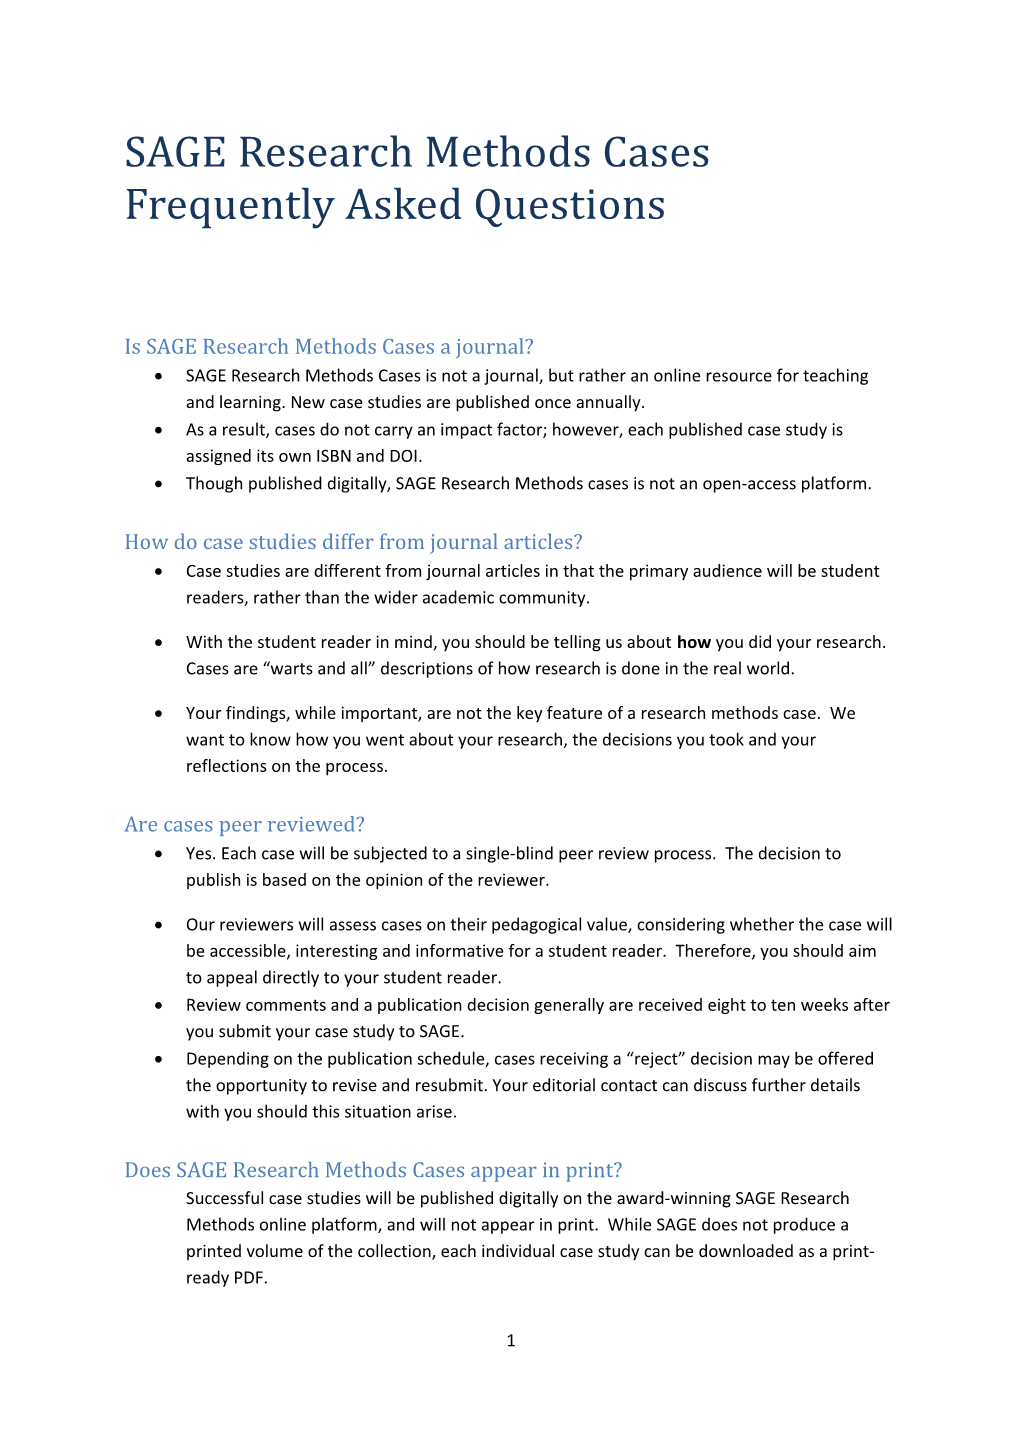 SAGE Research Methods Cases Frequently Asked Questions